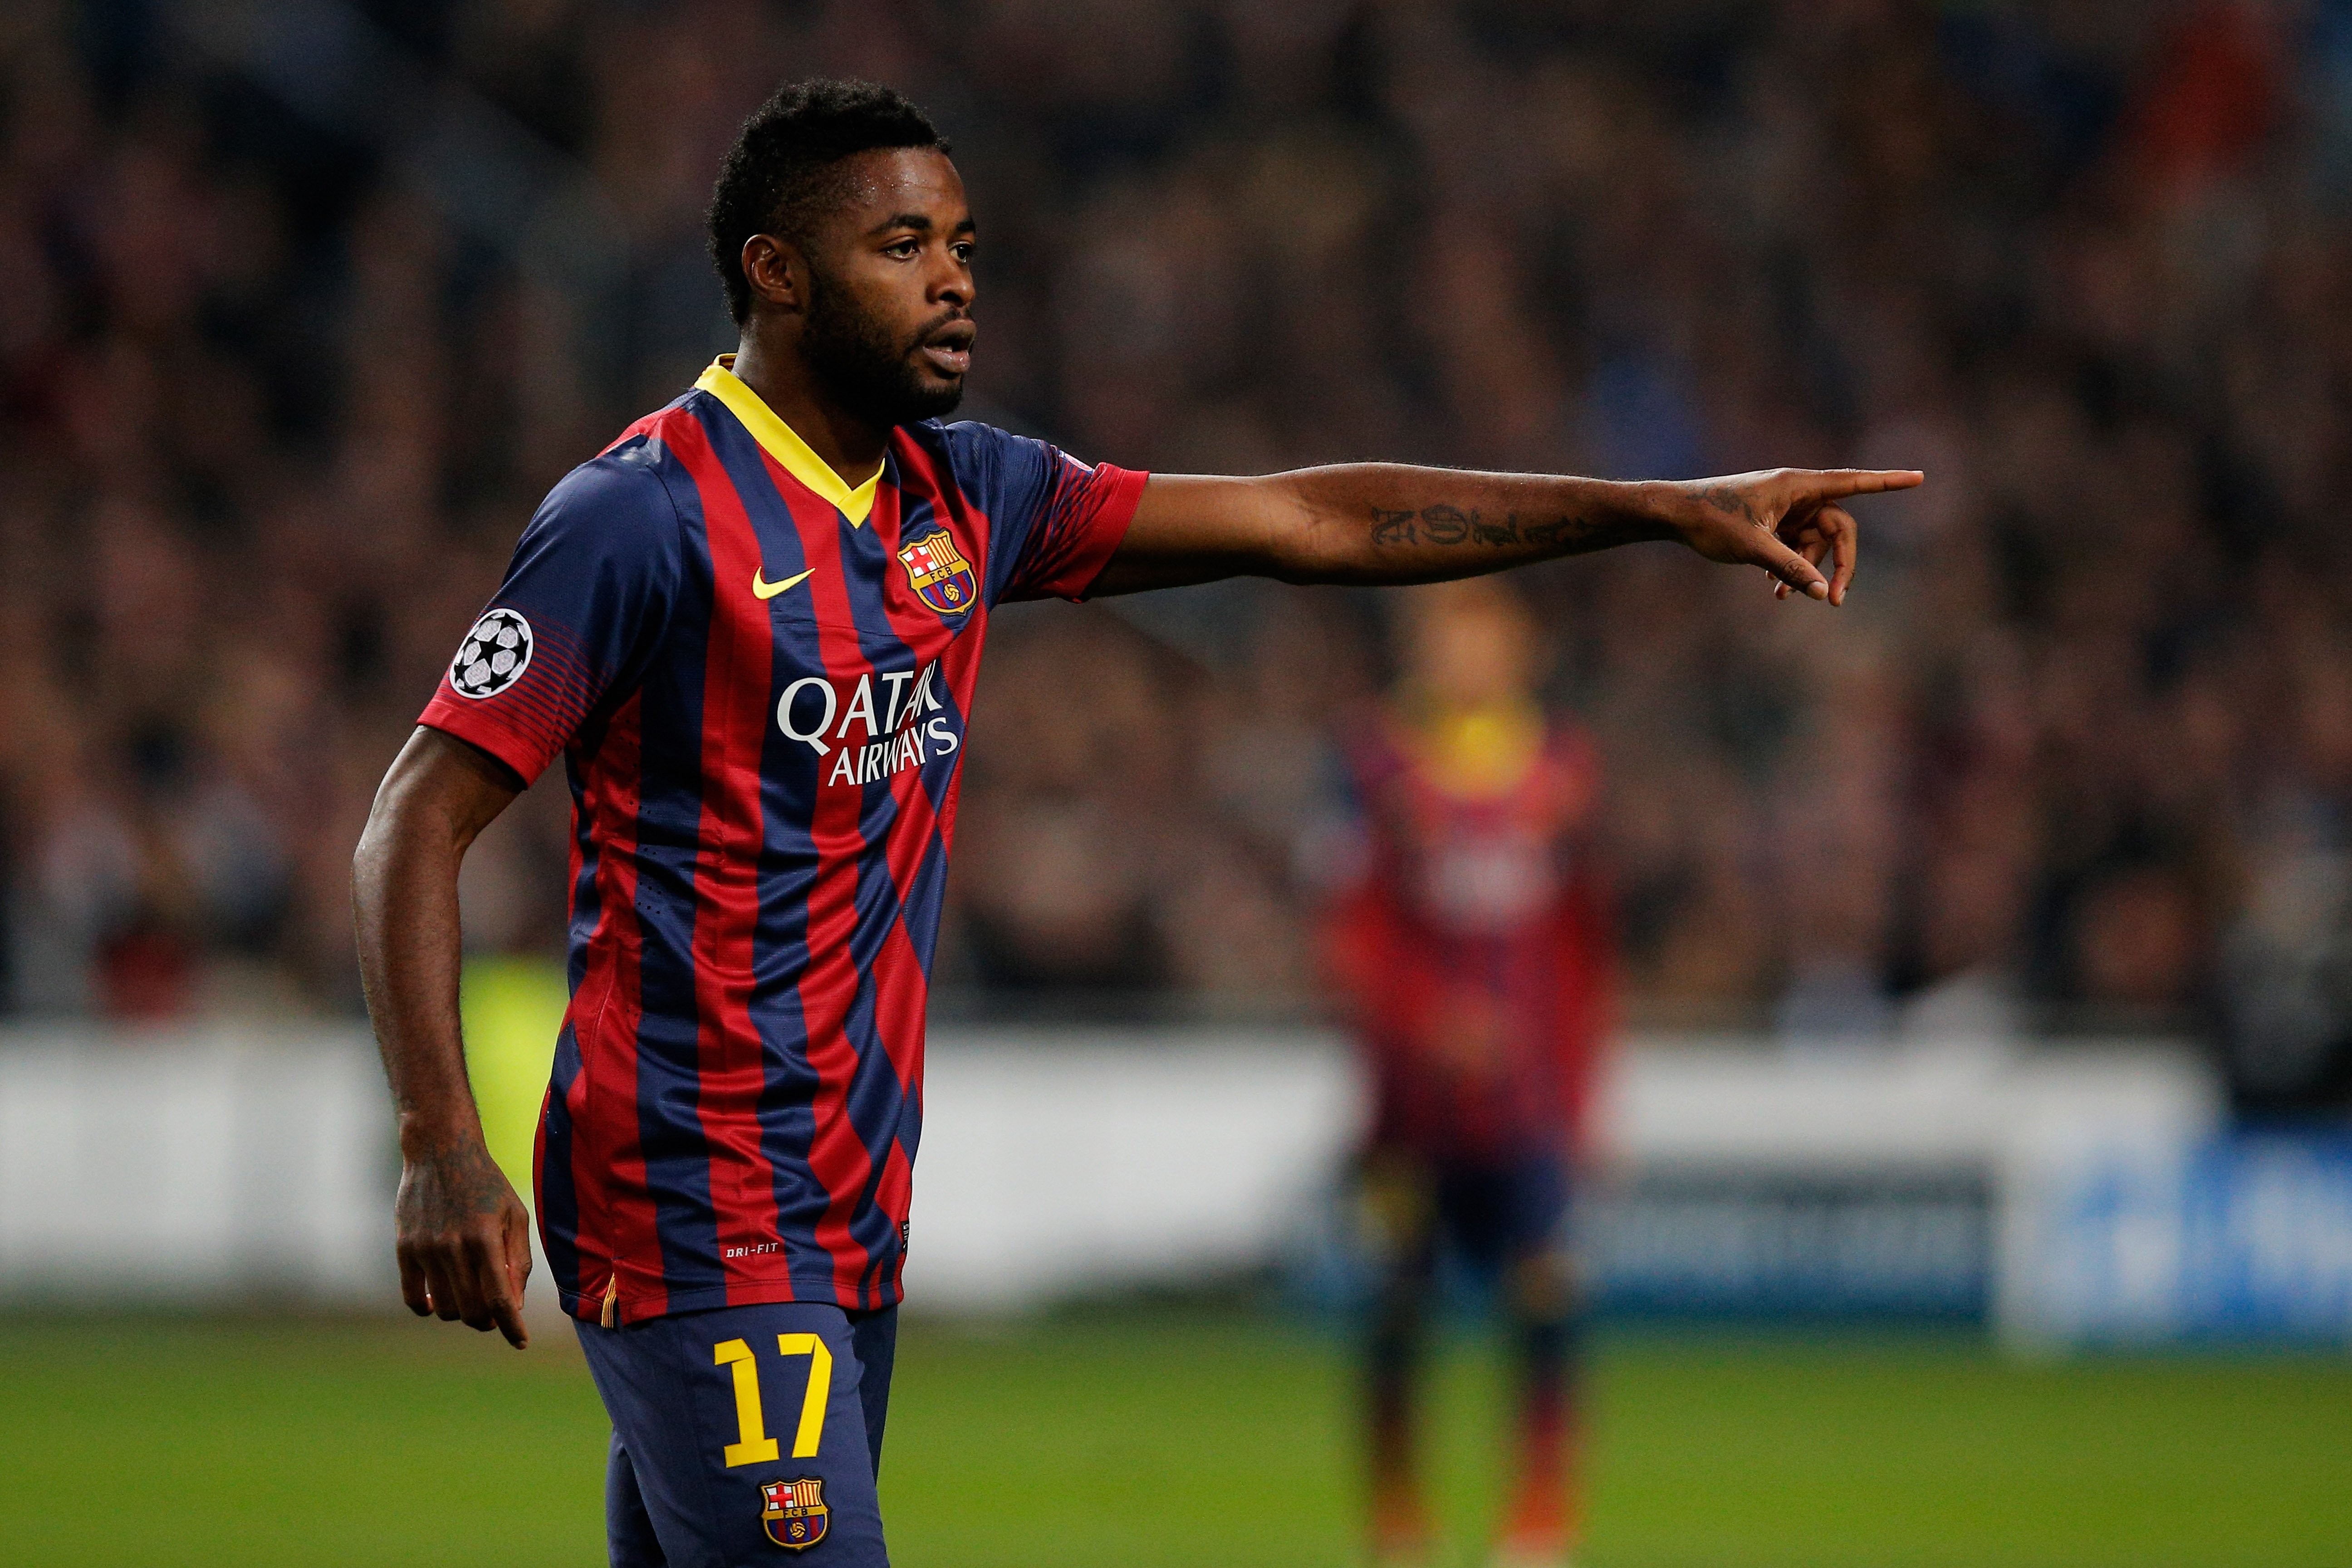 AMSTERDAM, NETHERLANDS - NOVEMBER 26:  Alex Song of Barcelona speaks to a team mate during the UEFA Champions League Group H match between Ajax Amsterdam and FC Barcelona at Amsterdam Arena on November 26, 2013 in Amsterdam, Netherlands.  (Photo by Dean Mouhtaropoulos/Getty Images)